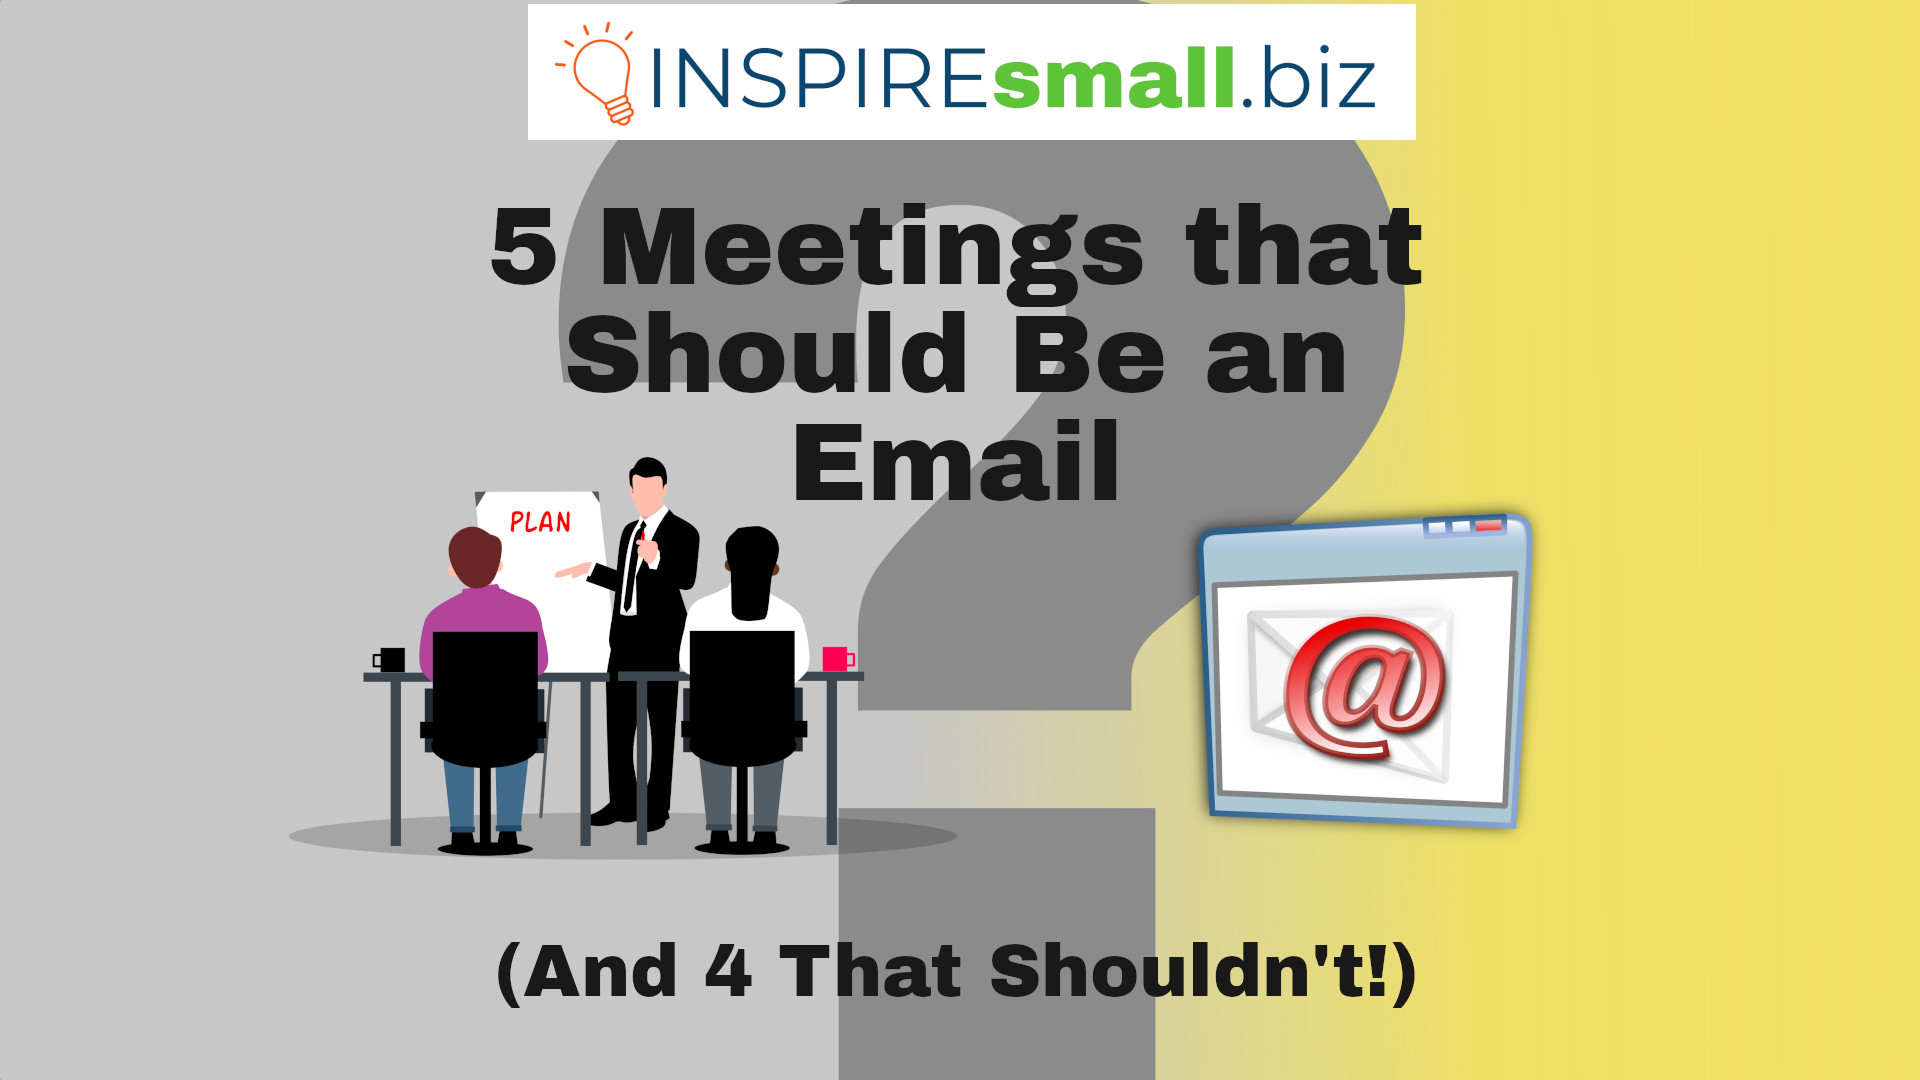 5 Meetings that Should Be an Email (And 4 that Shouldn't!) from INSPIREsmall.biz